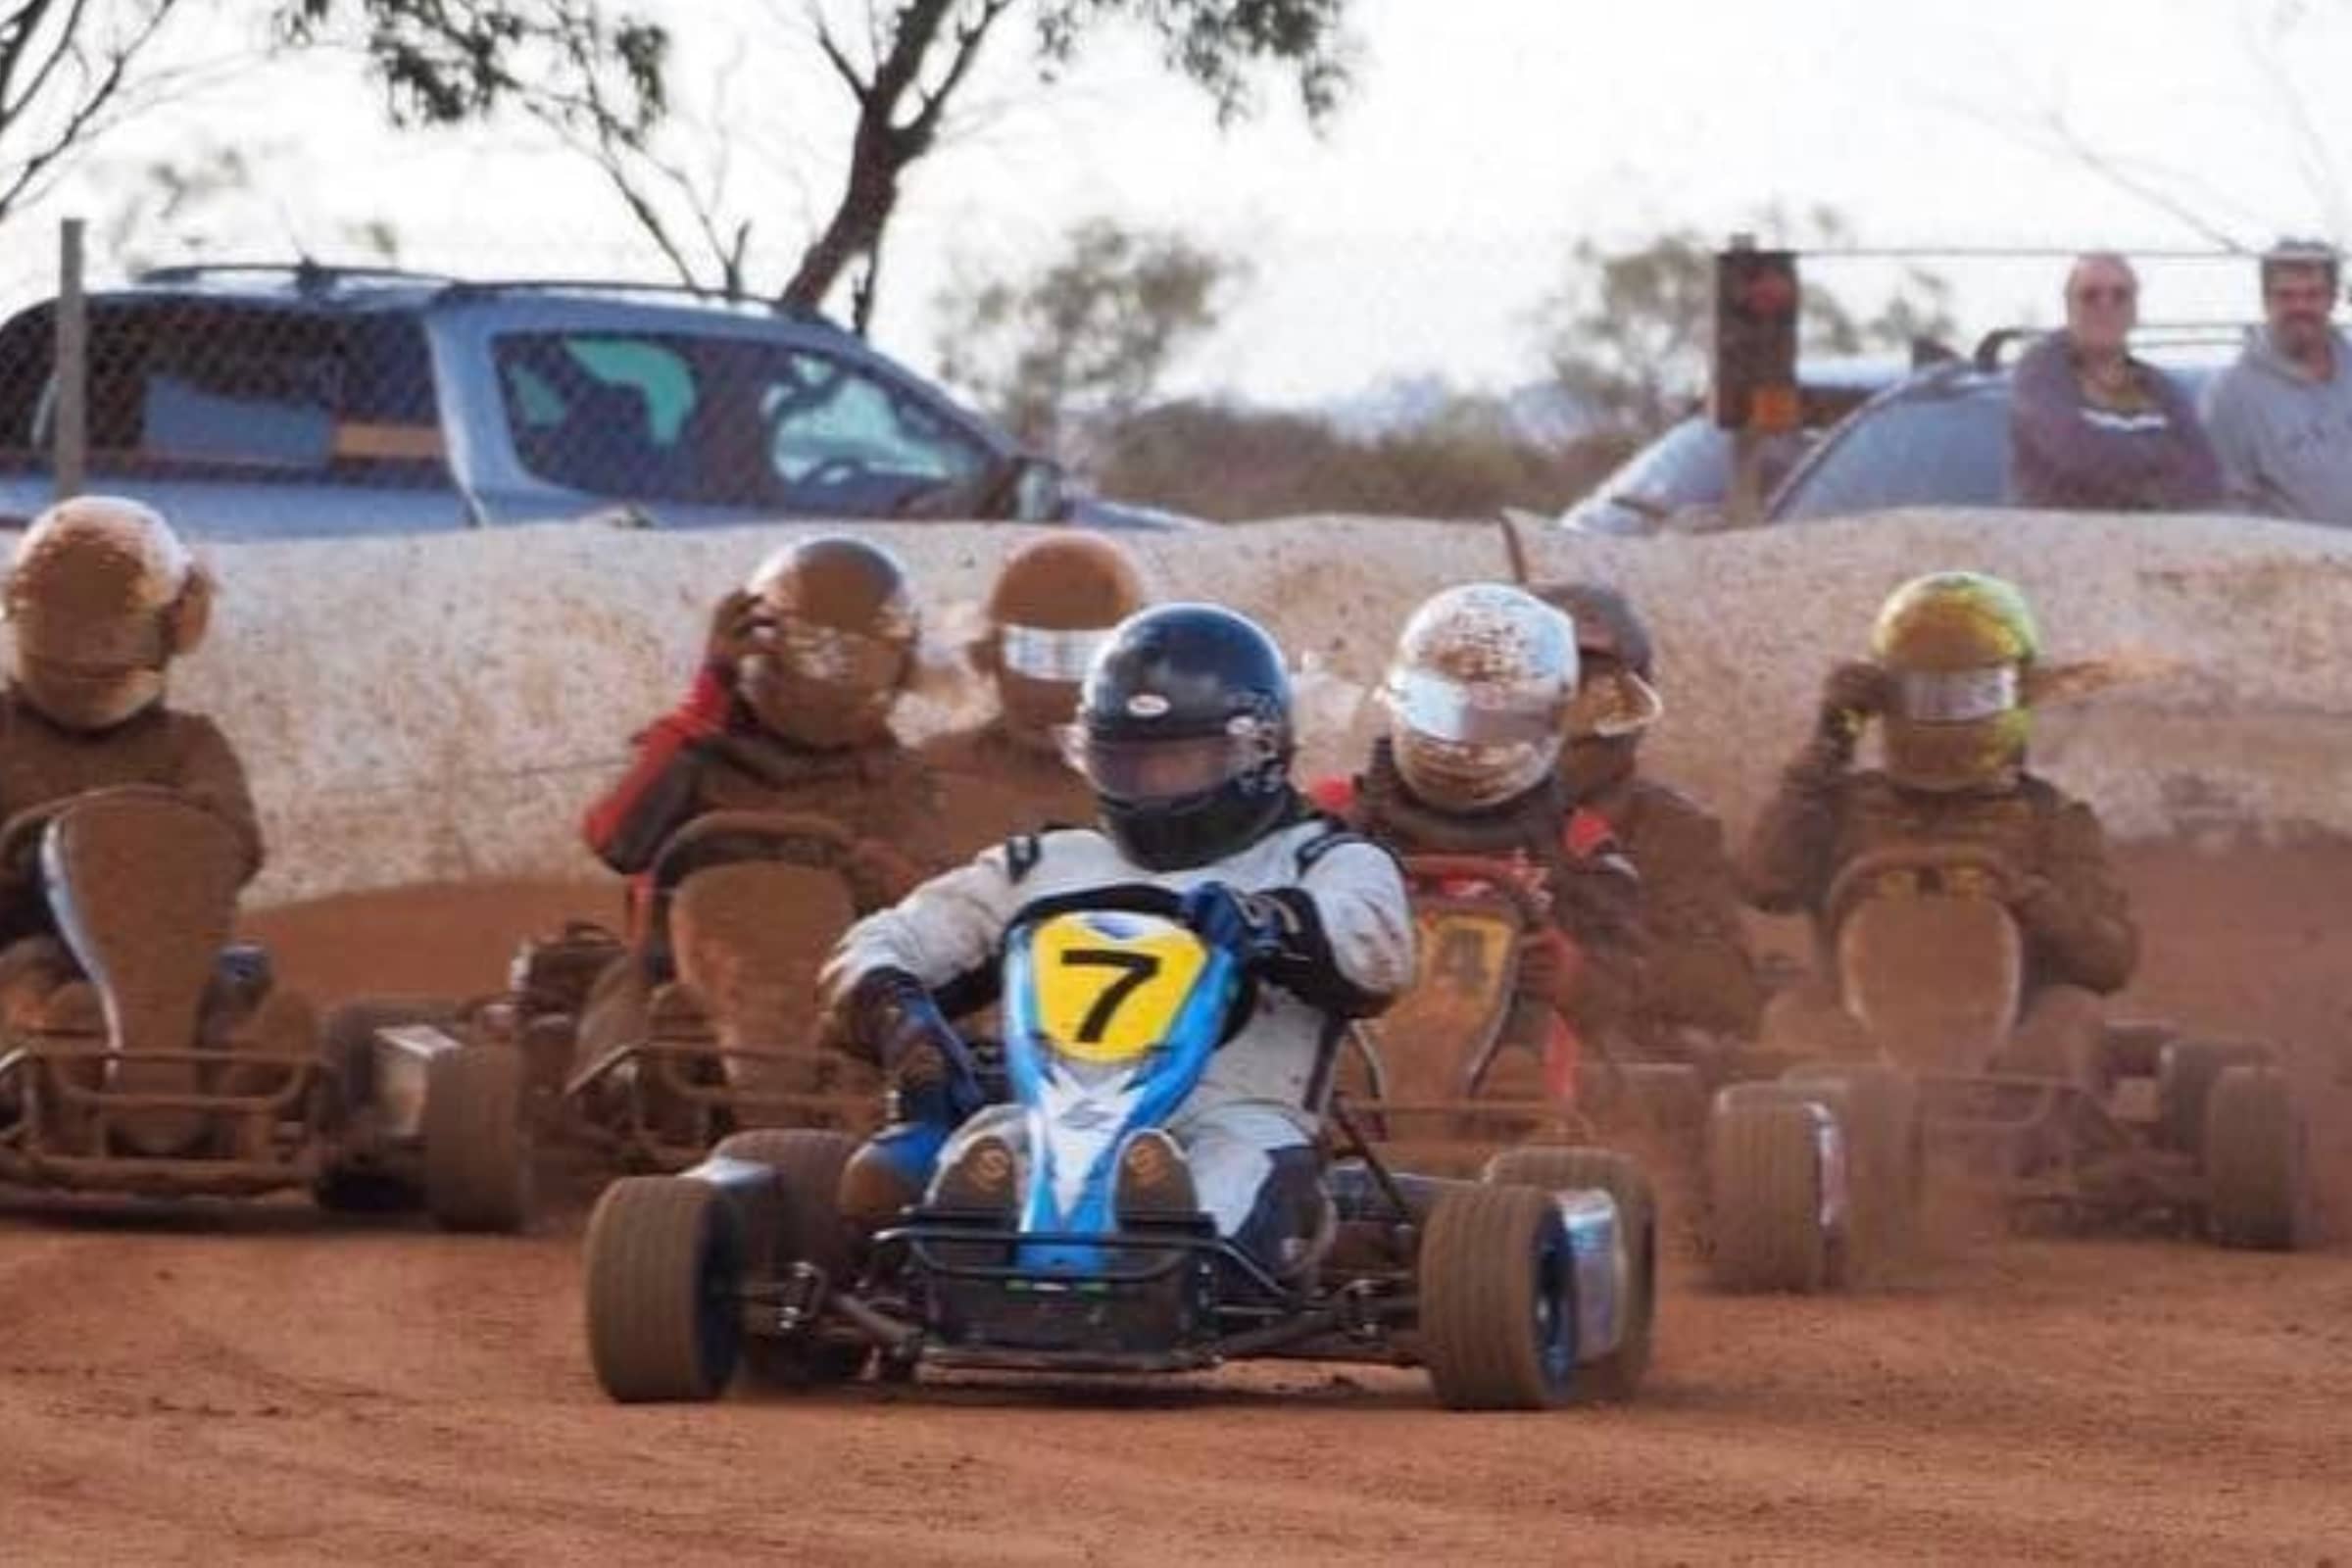 Dirt Carts on a dirt racecourse going fast